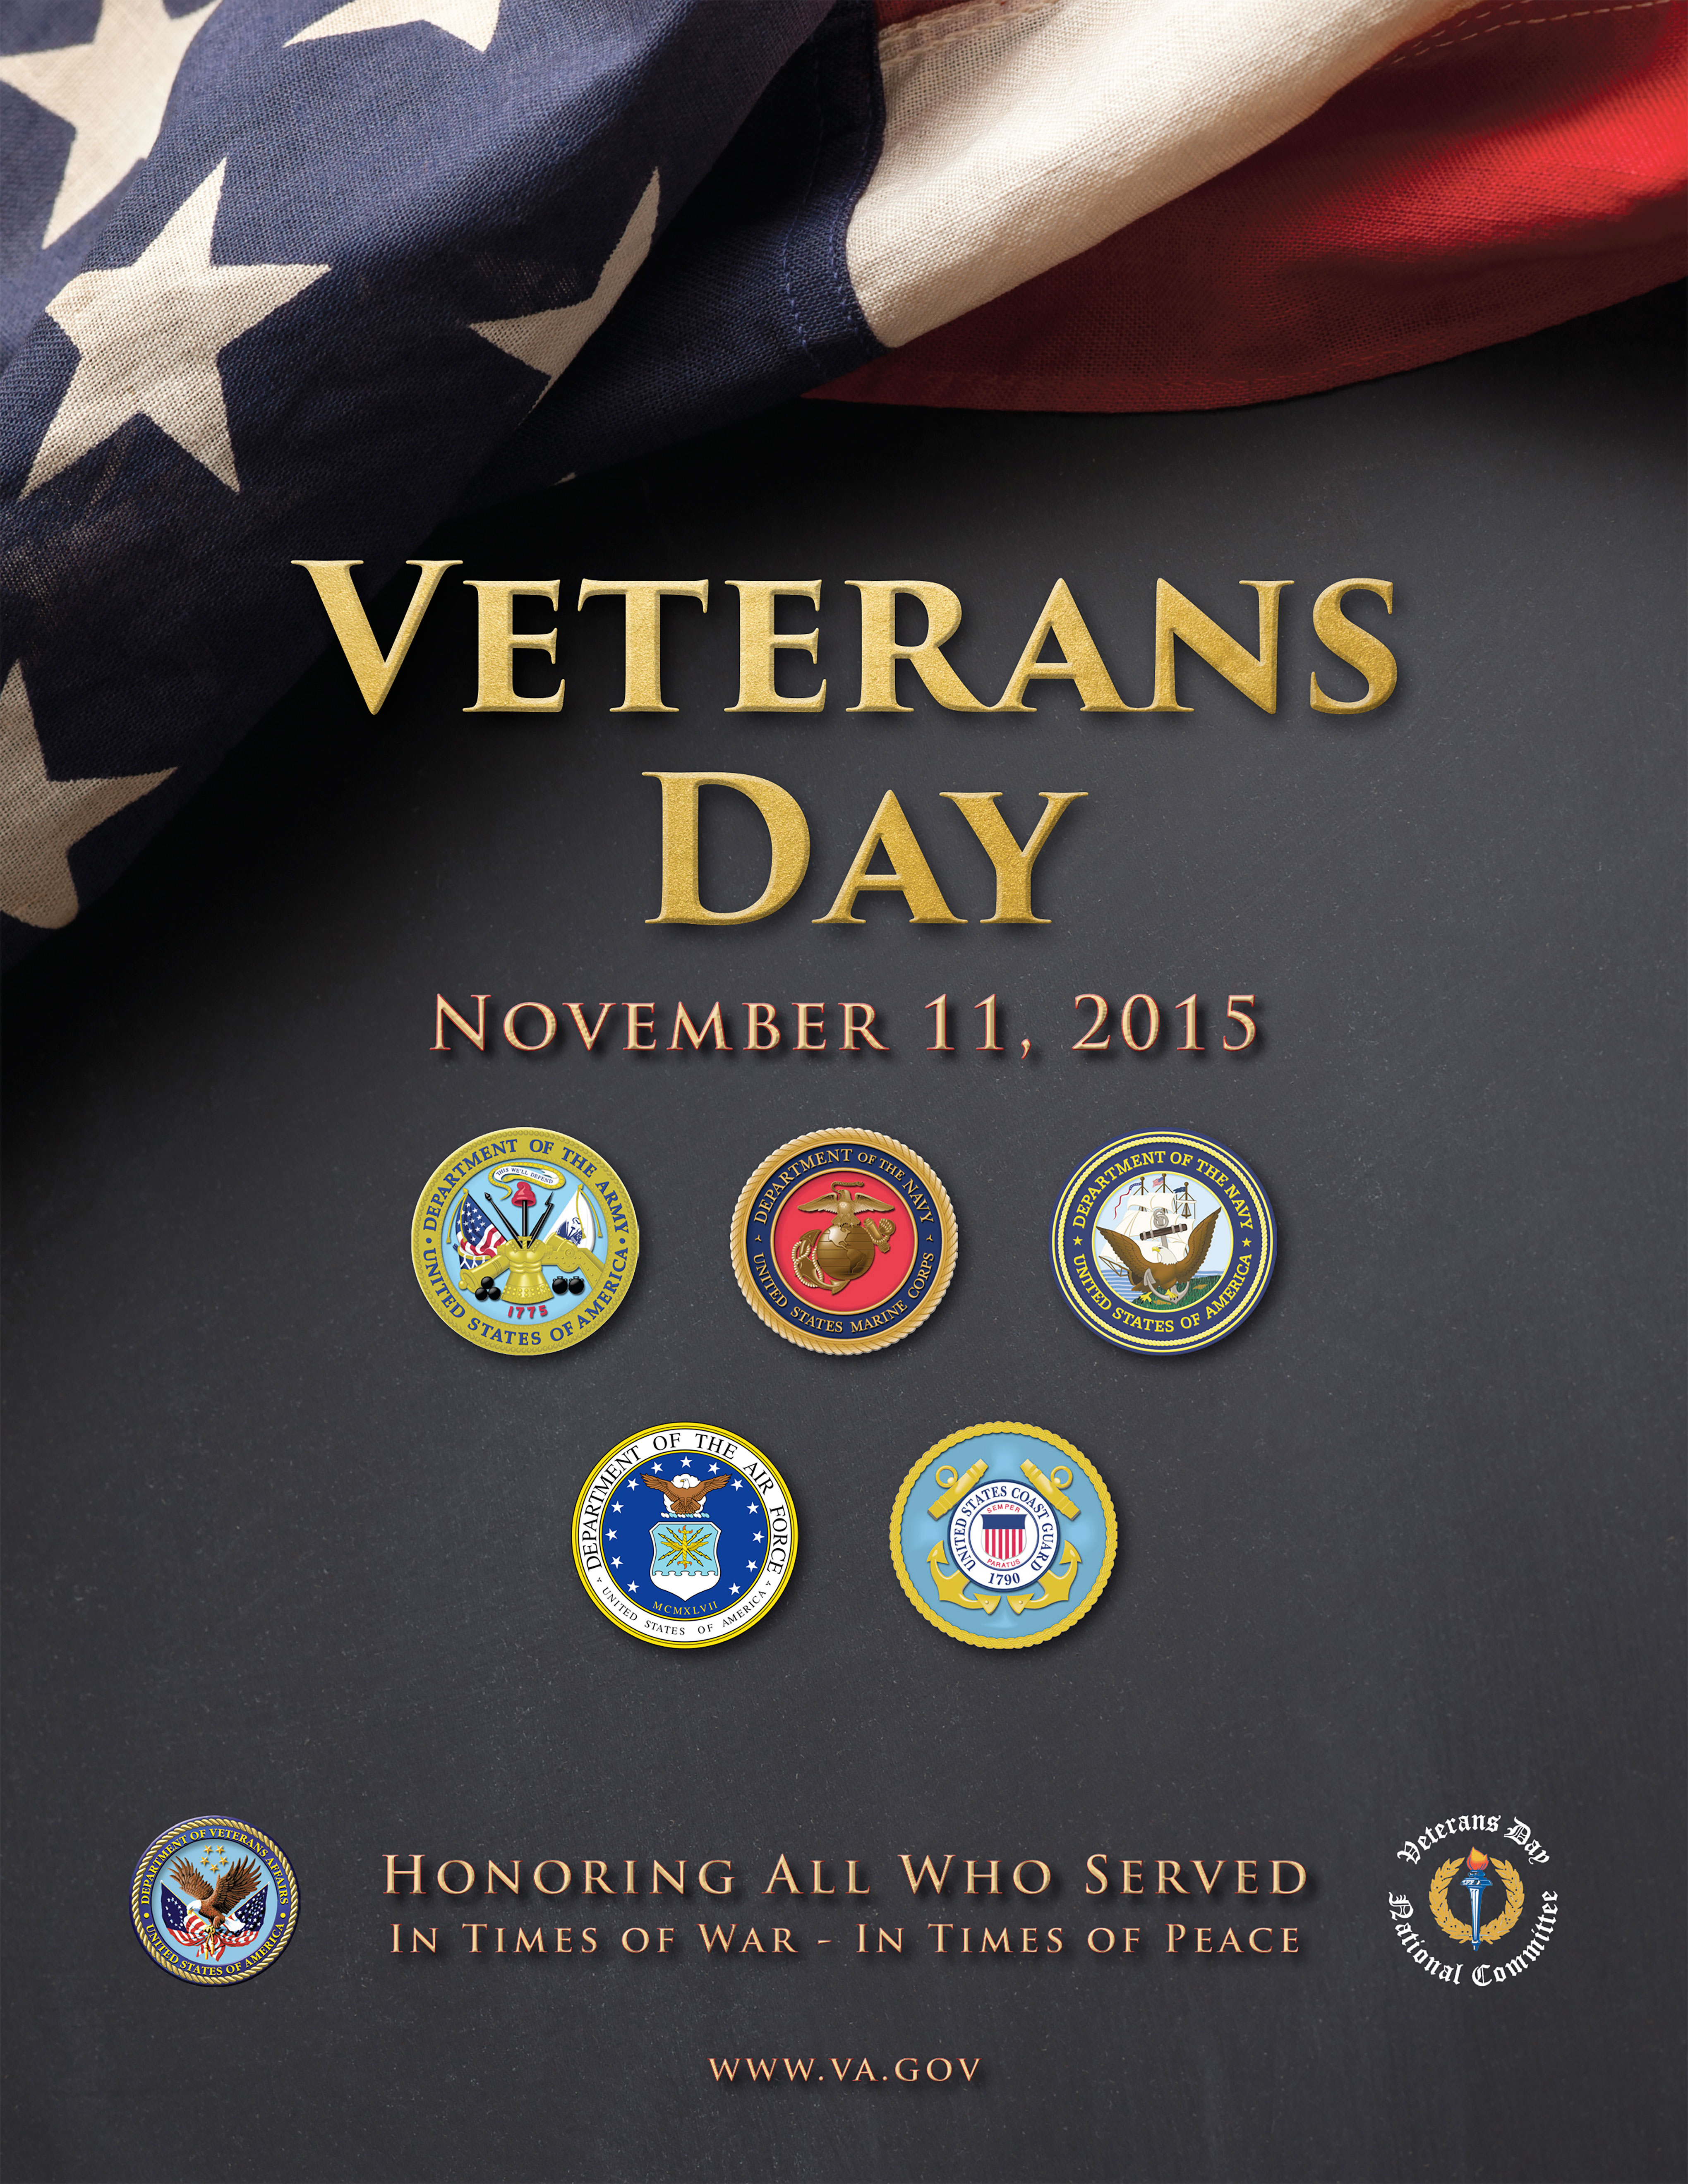 Veterans Day Posters Free Printable 97,000+ Vectors, Stock Photos & Psd